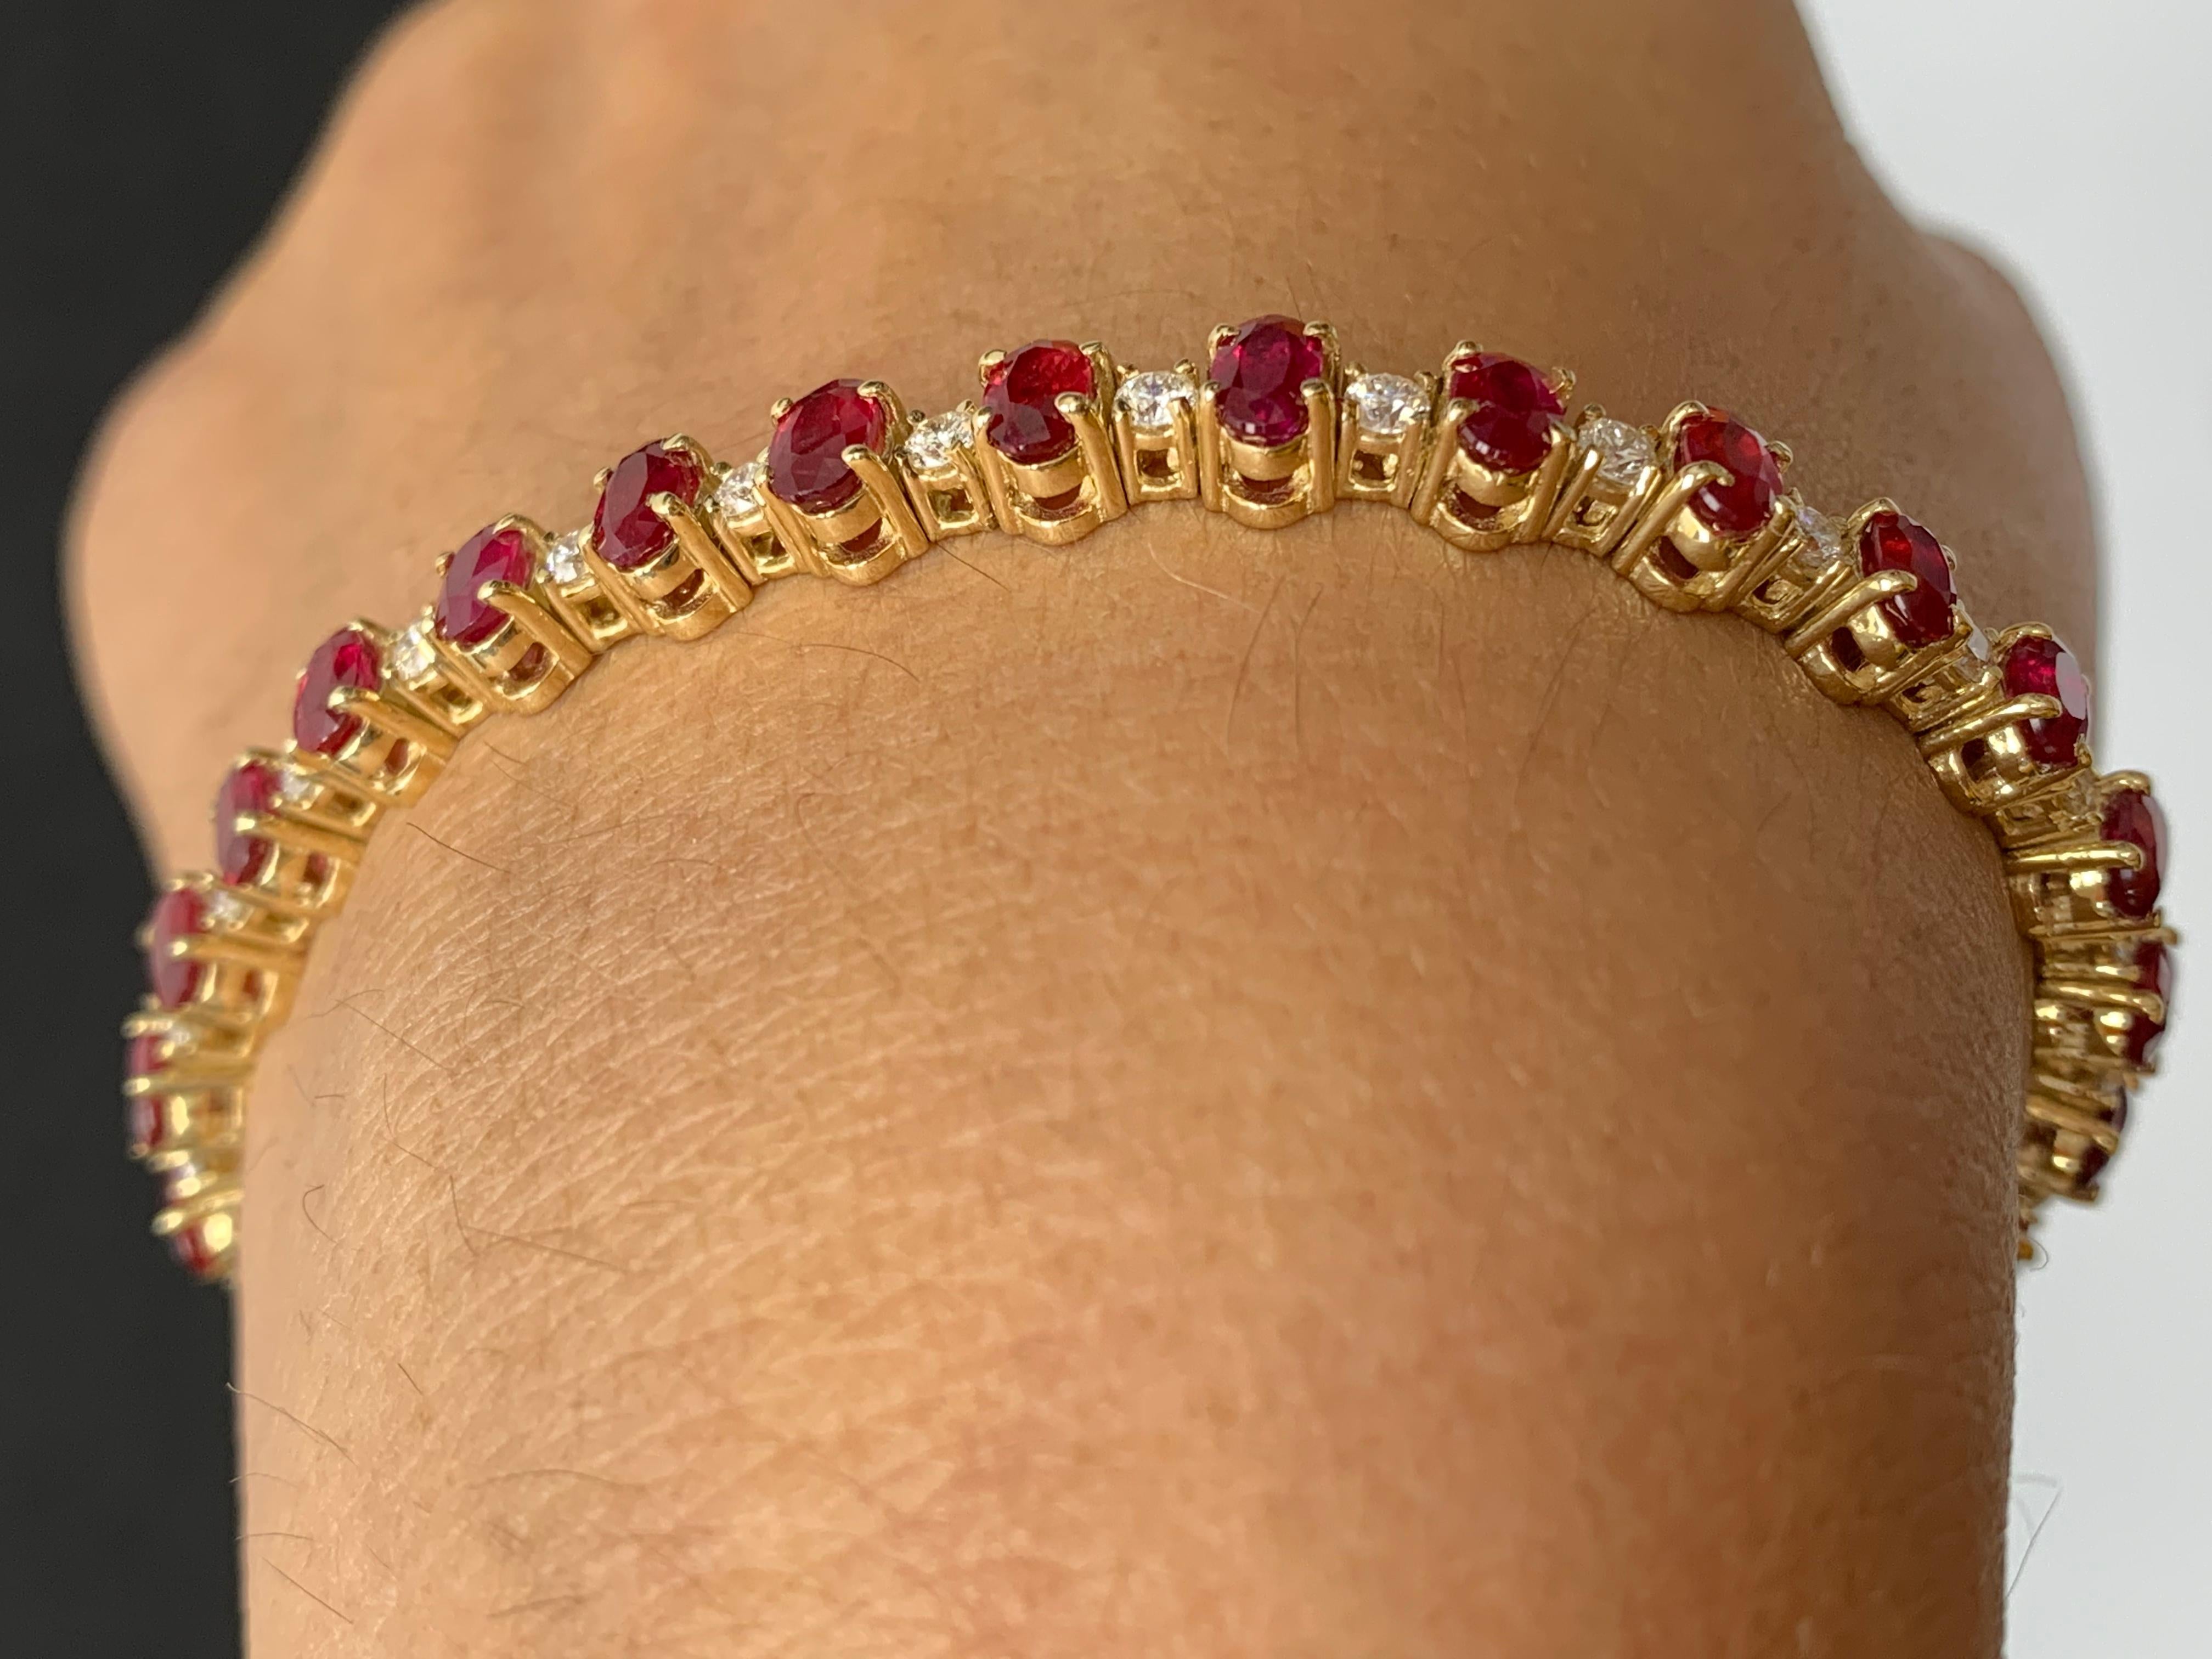 Modern Grandeur 9.27 Carats Oval Cut Ruby and Diamond Bracelet in 14k Yellow Gold For Sale